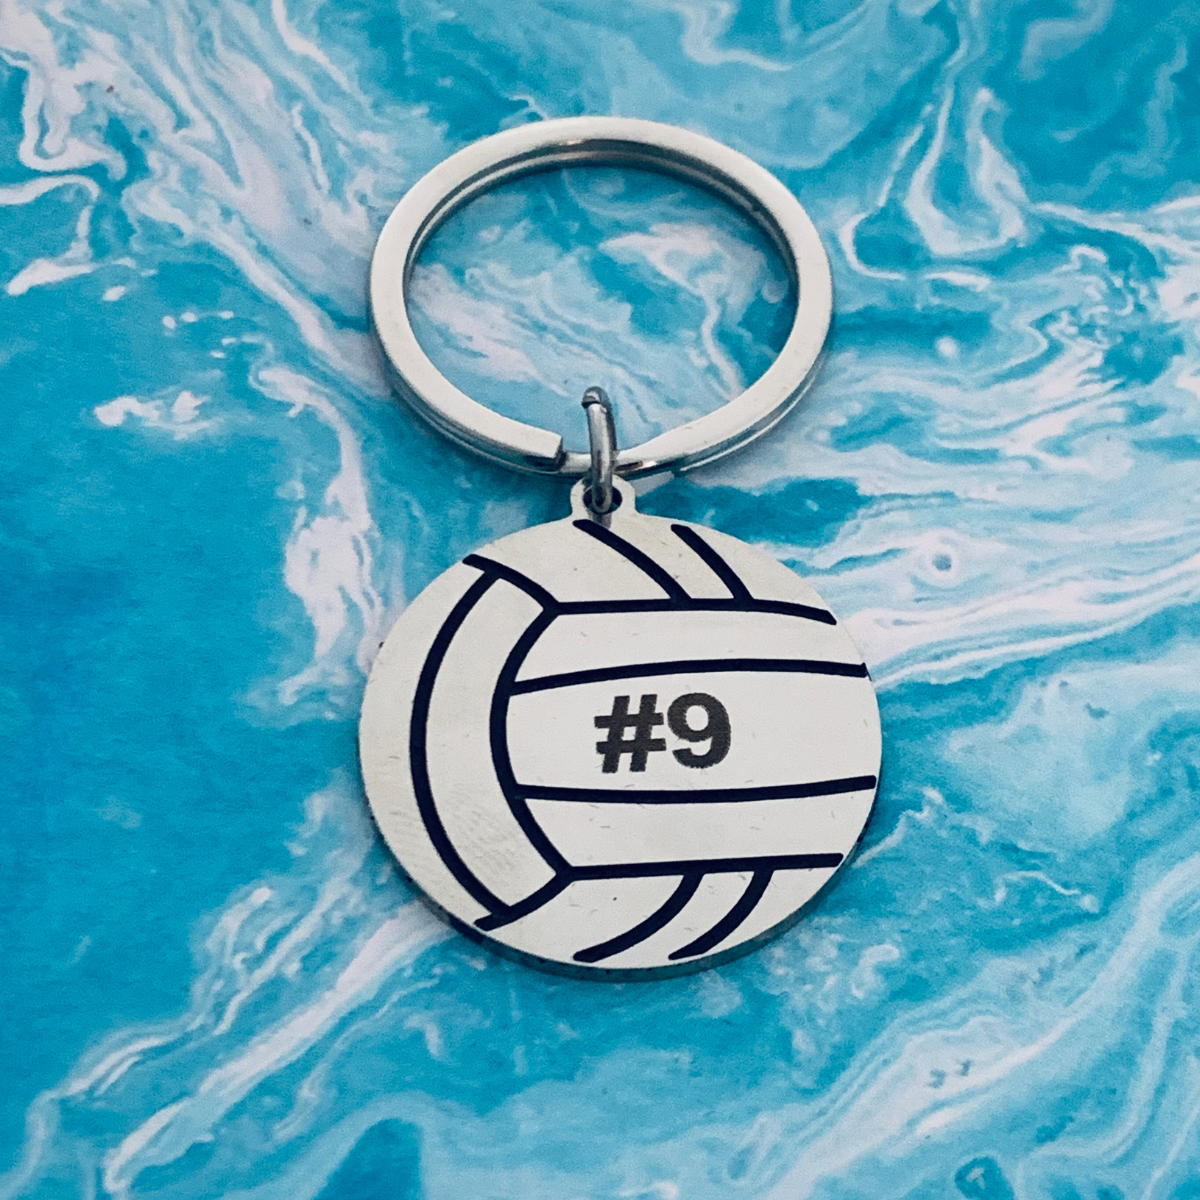 Personalized Engraved Volleyball Keychain with Number